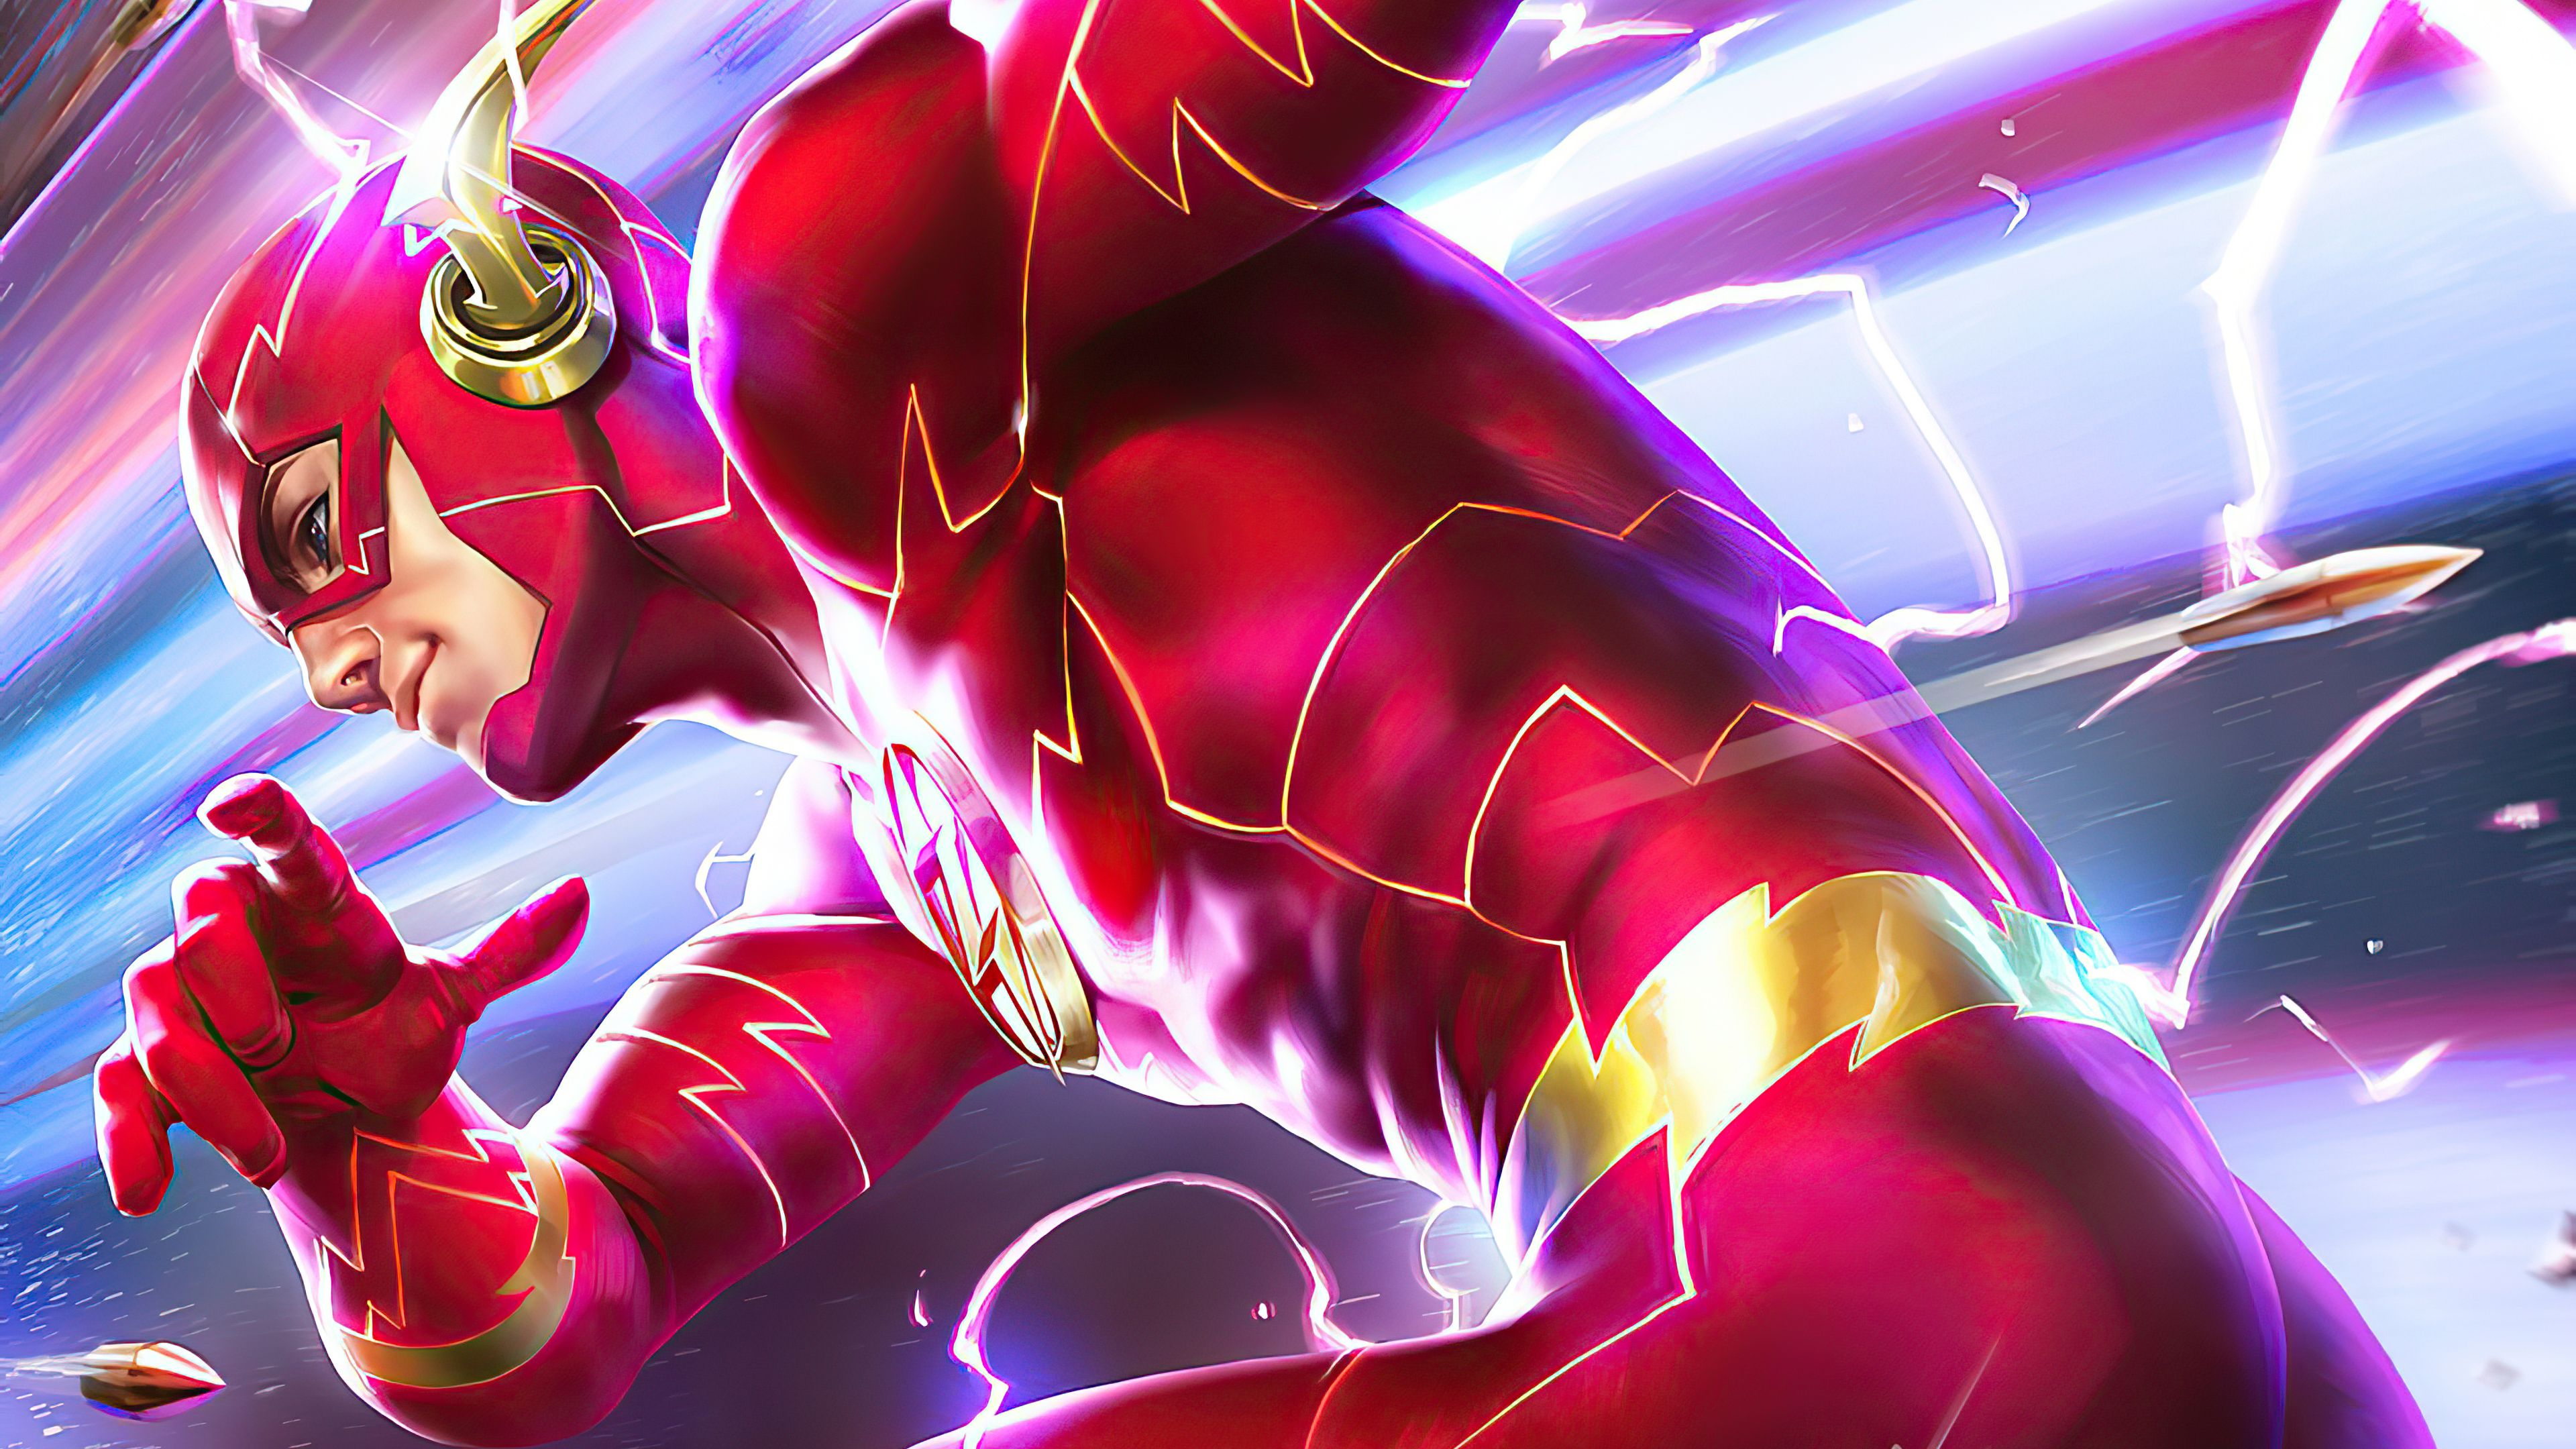 Flash Running 4k Artwork, HD Superheroes, 4k Wallpaper, Image, Background, Photo and Picture